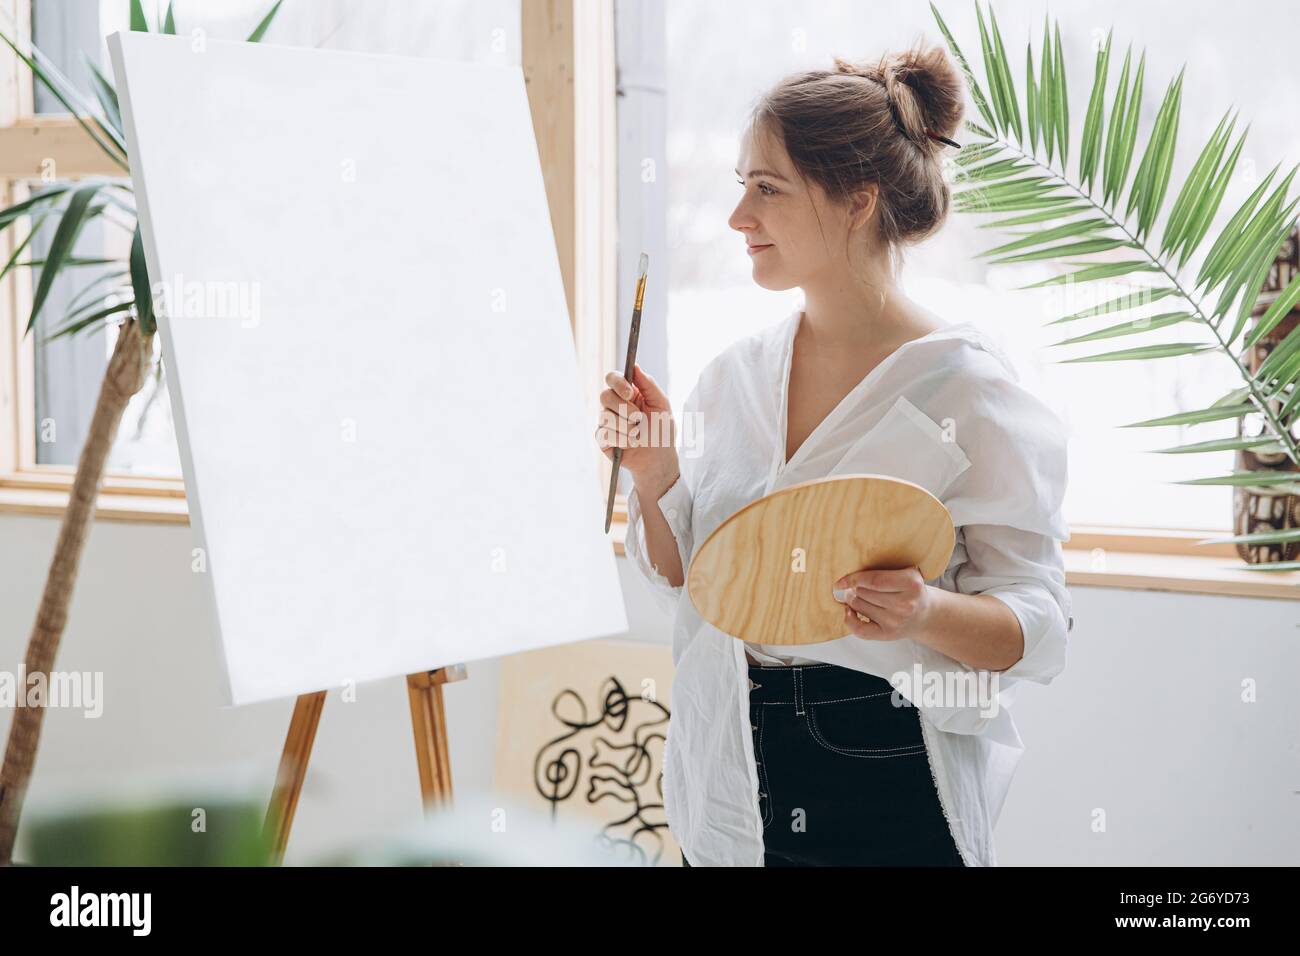 Positive woman holding paint brush and wooden art palette Stock Photo